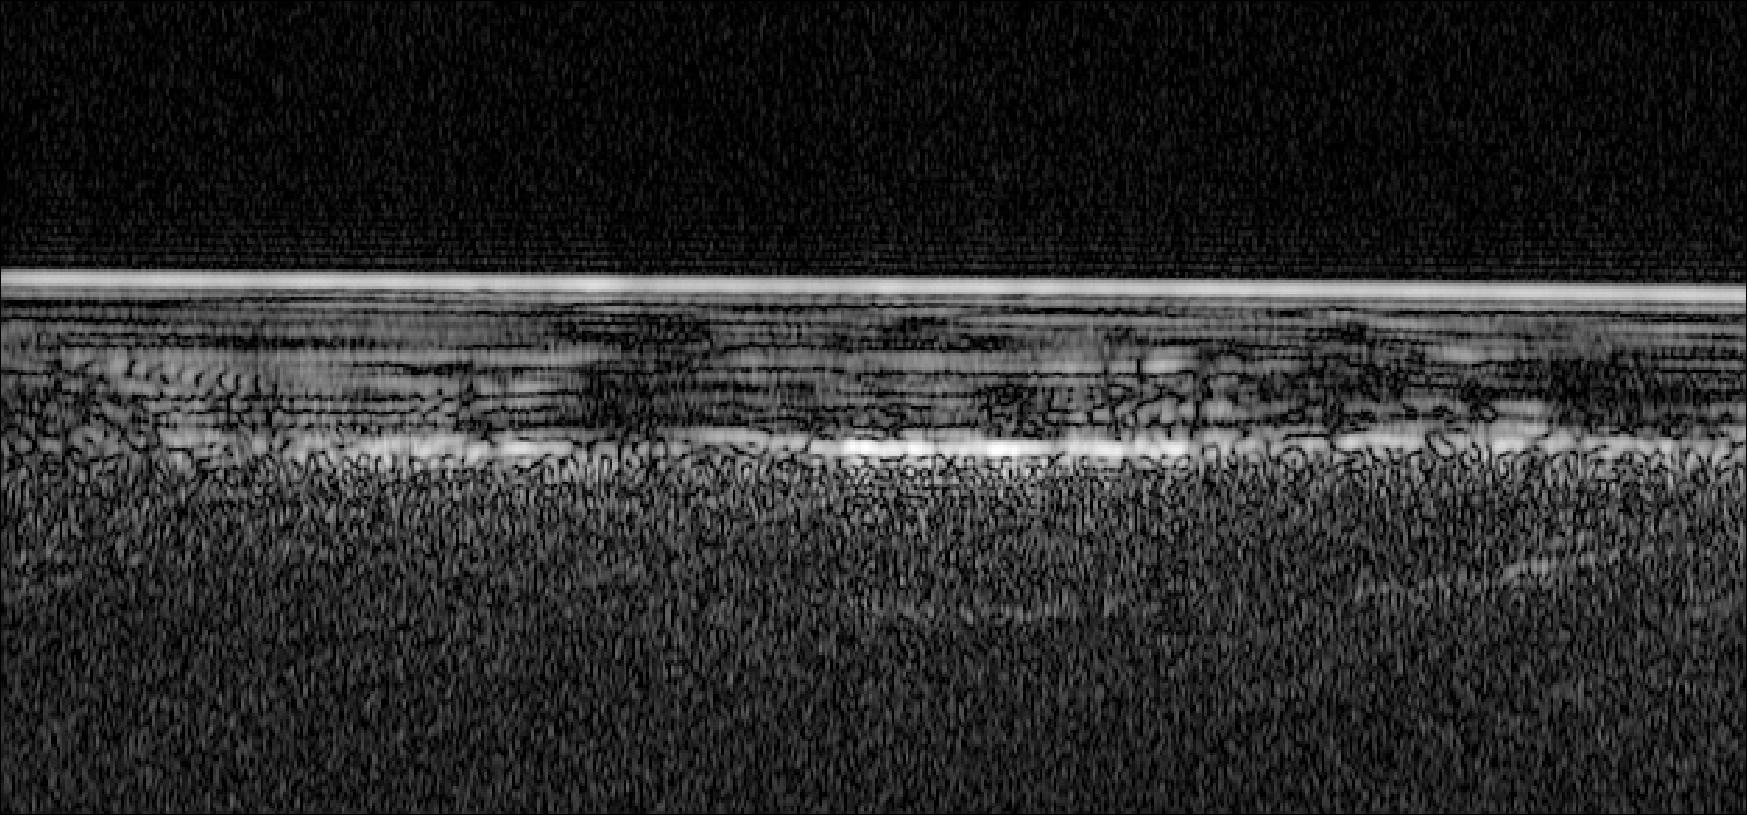 Figure 74: ESA's Mars Express has used radar signals bounced through underground layers of ice to identify a pond of water buried below the surface. This image shows an example radar profile for one of 29 orbits over the 200 x 200 km study region in the south polar region of Mars. The bright horizontal feature at the top corresponds to the icy surface of Mars. Layers of the south polar layered deposits – layers of ice and dust – are seen to a depth of about 1.5 km. Below is a base layer that in some areas is even much brighter than the surface reflections, while in other places is rather diffuse. The brightest reflections from the base layer – close to the center of this image – are centered around 193º/81ºS in all intersecting orbits, outlining a well-defined, 20 km wide subsurface anomaly that is interpreted as a pond of liquid water (image credit:ESA/NASA/JPL/ASI/University of Rome)